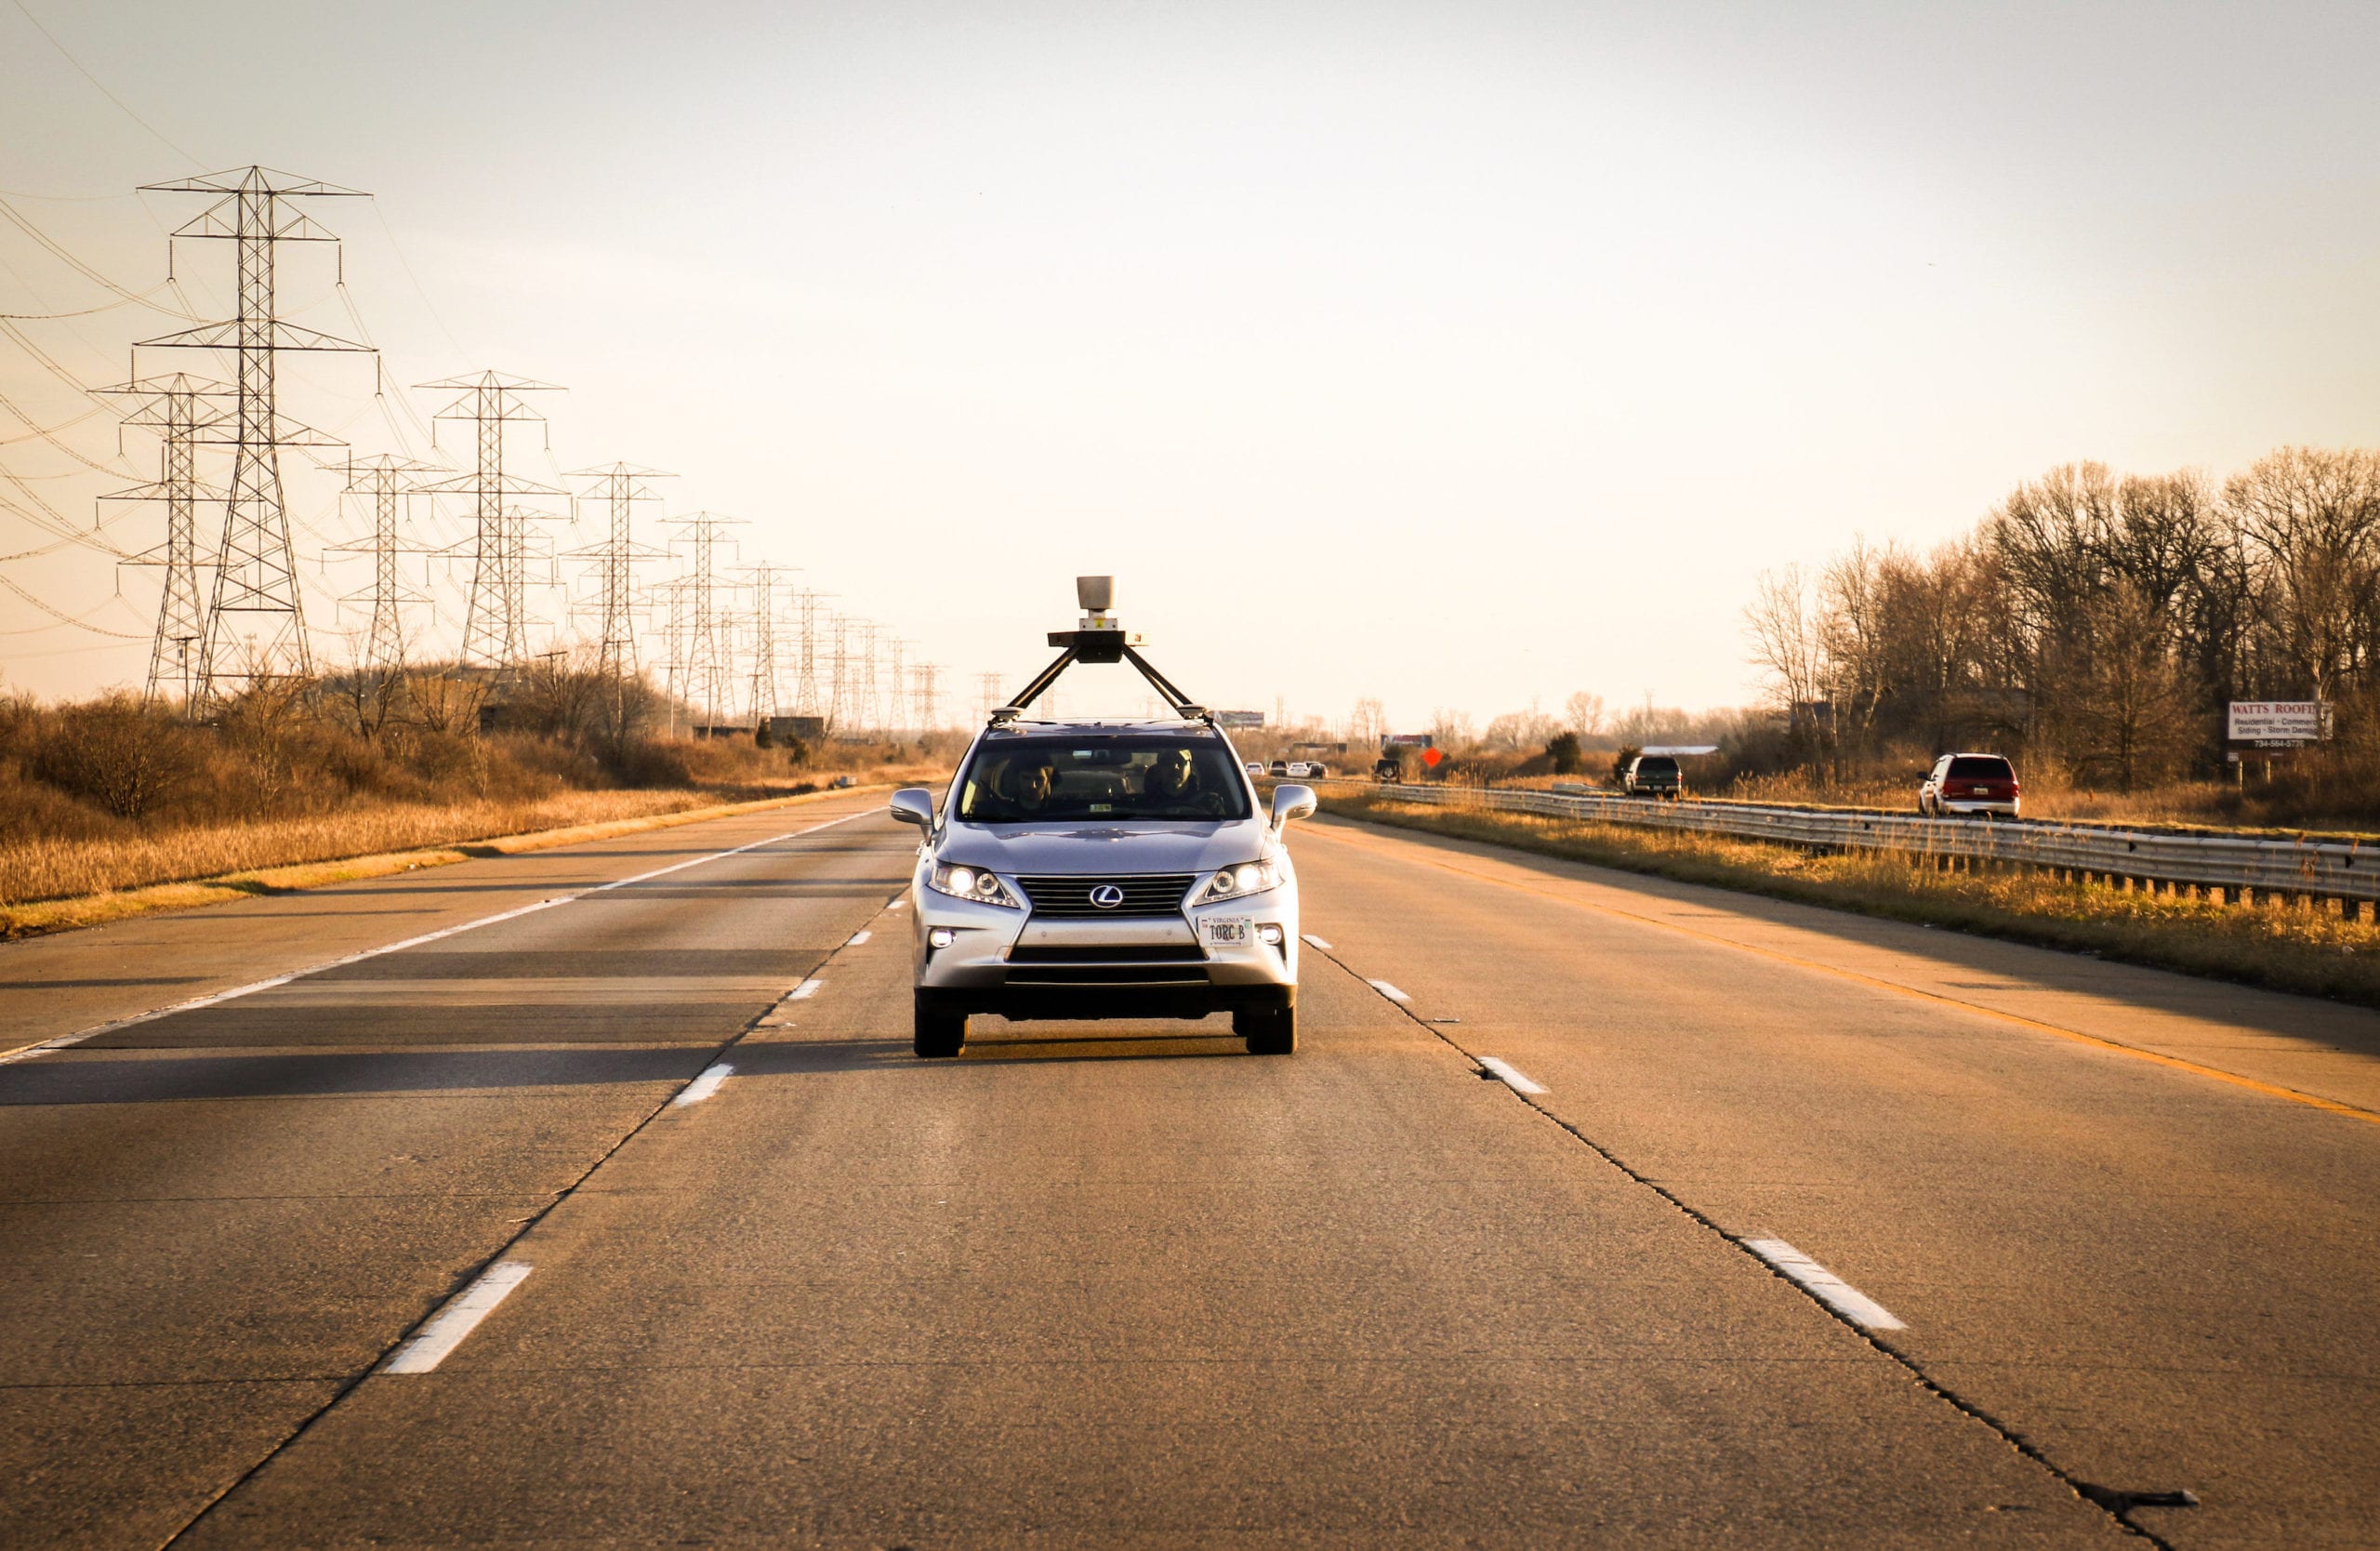 Torc’s self-driving vehicle on the road.